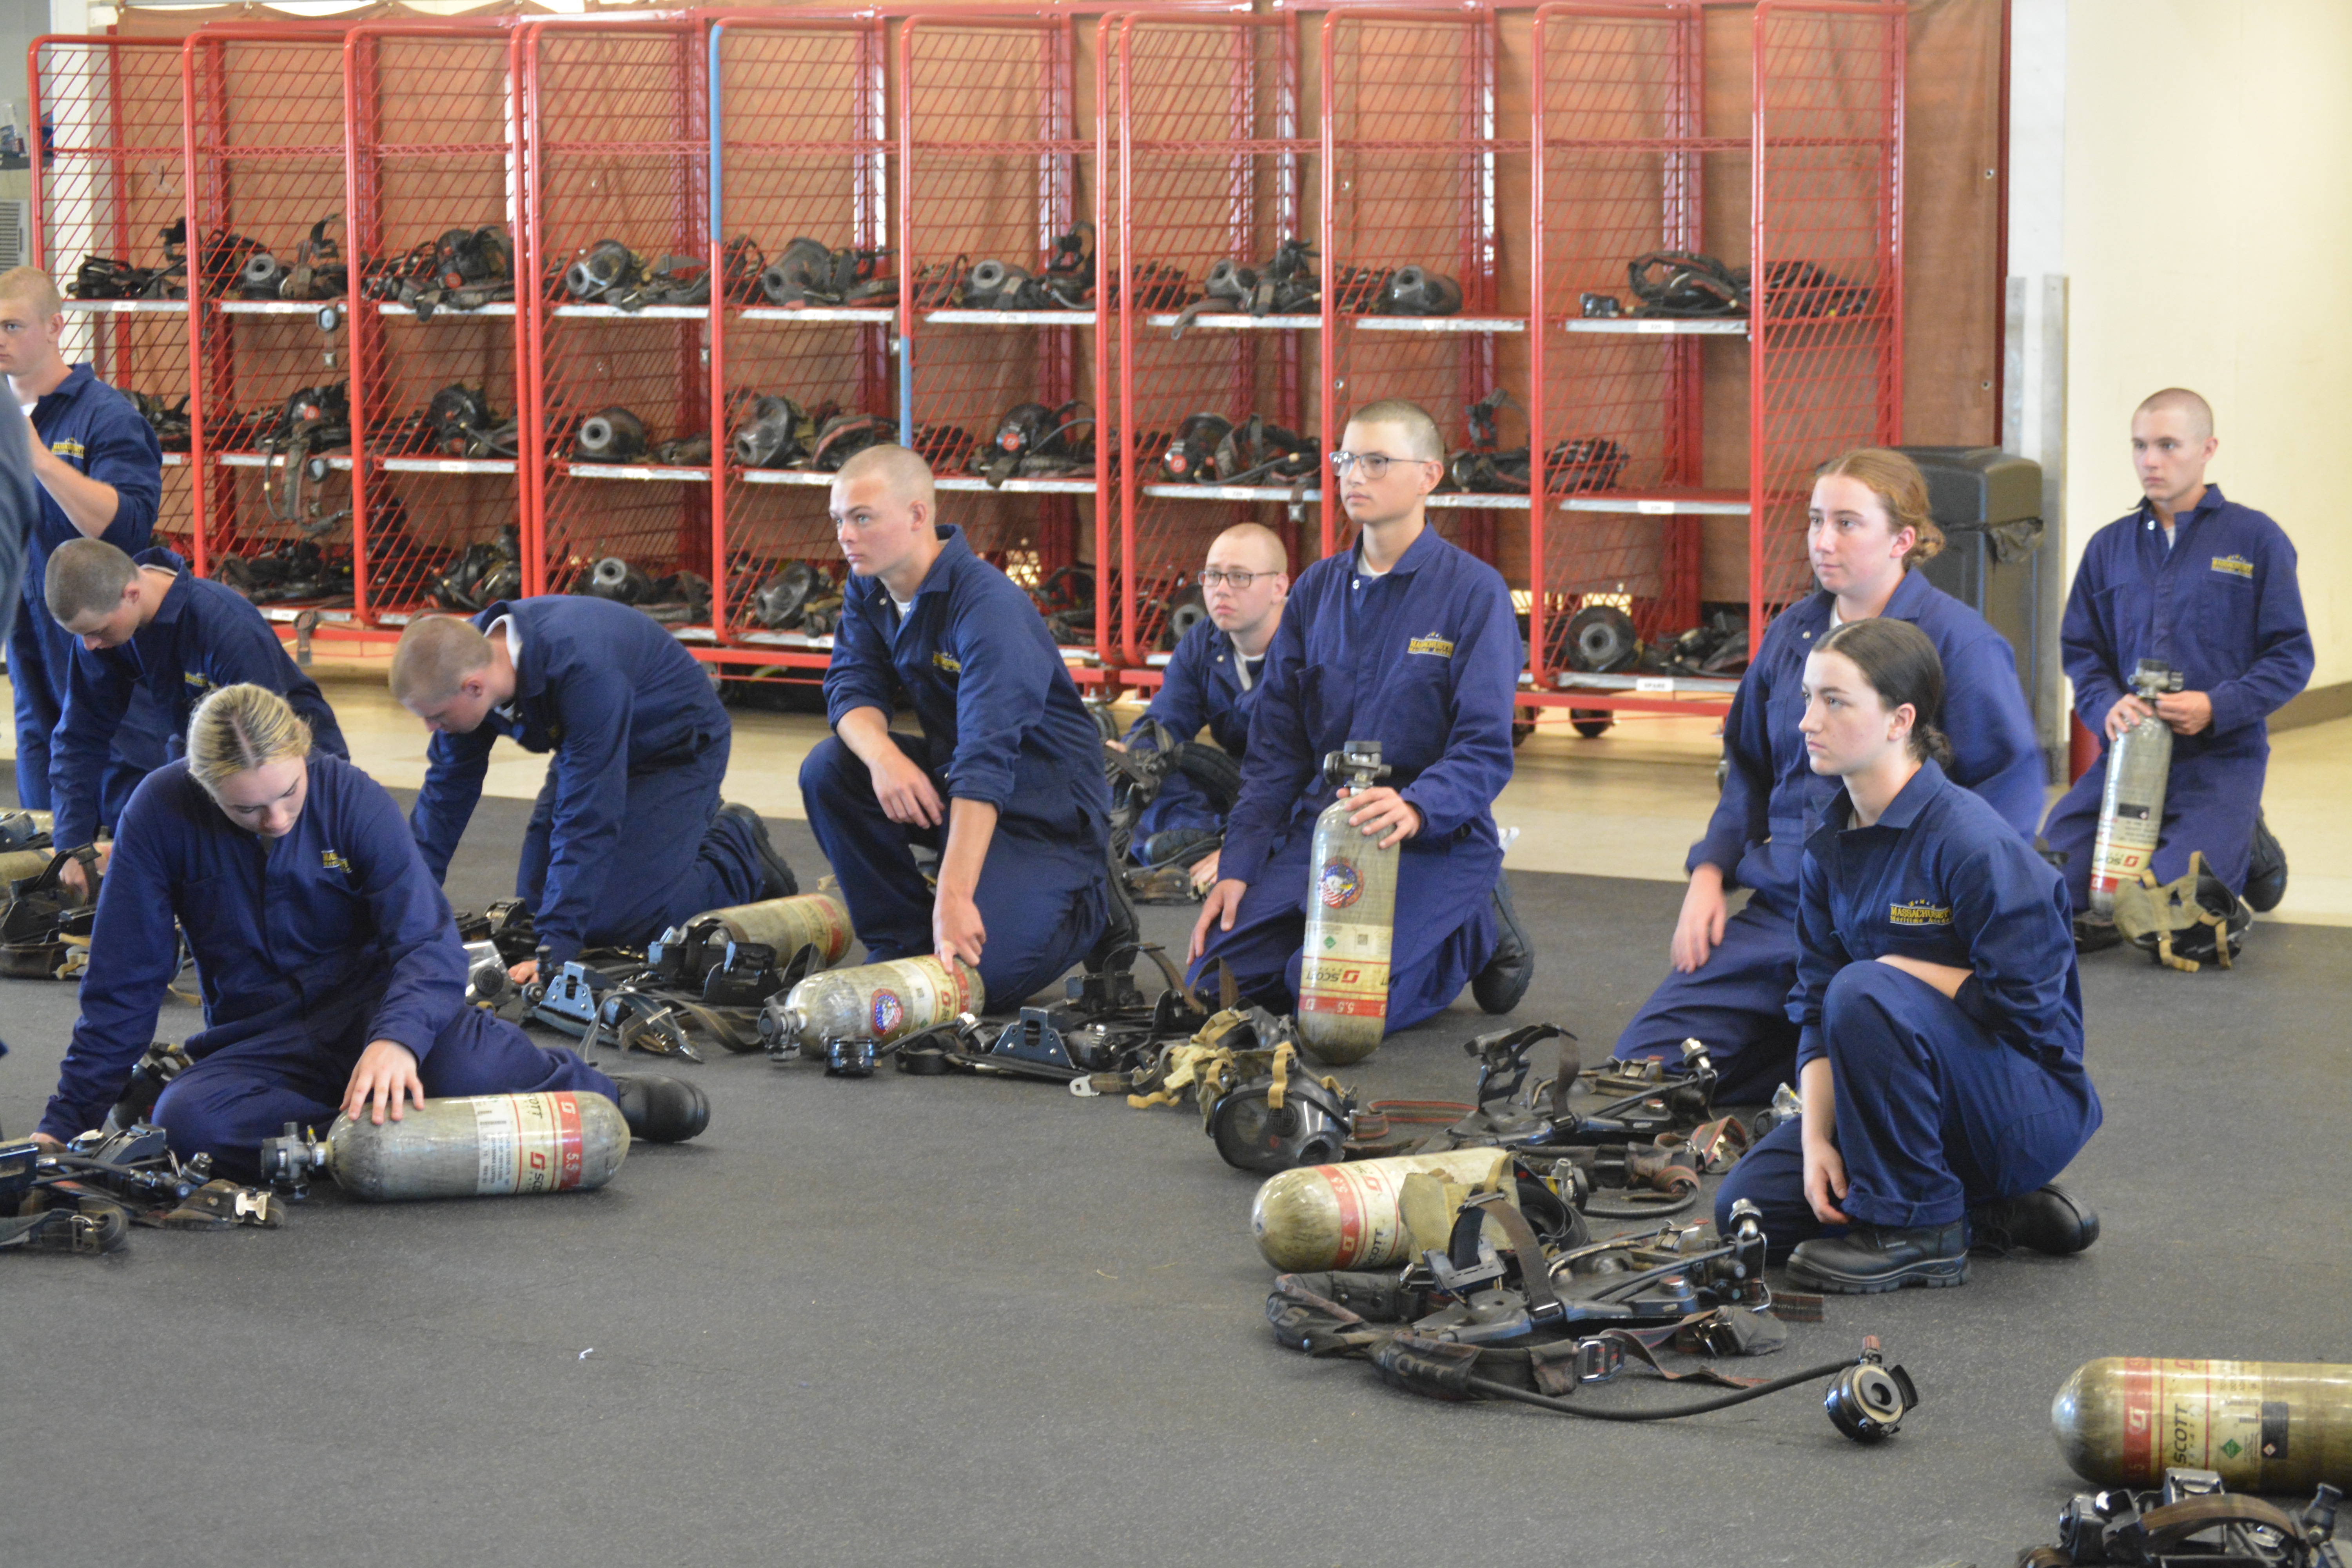 Learning how to use SCBA gear